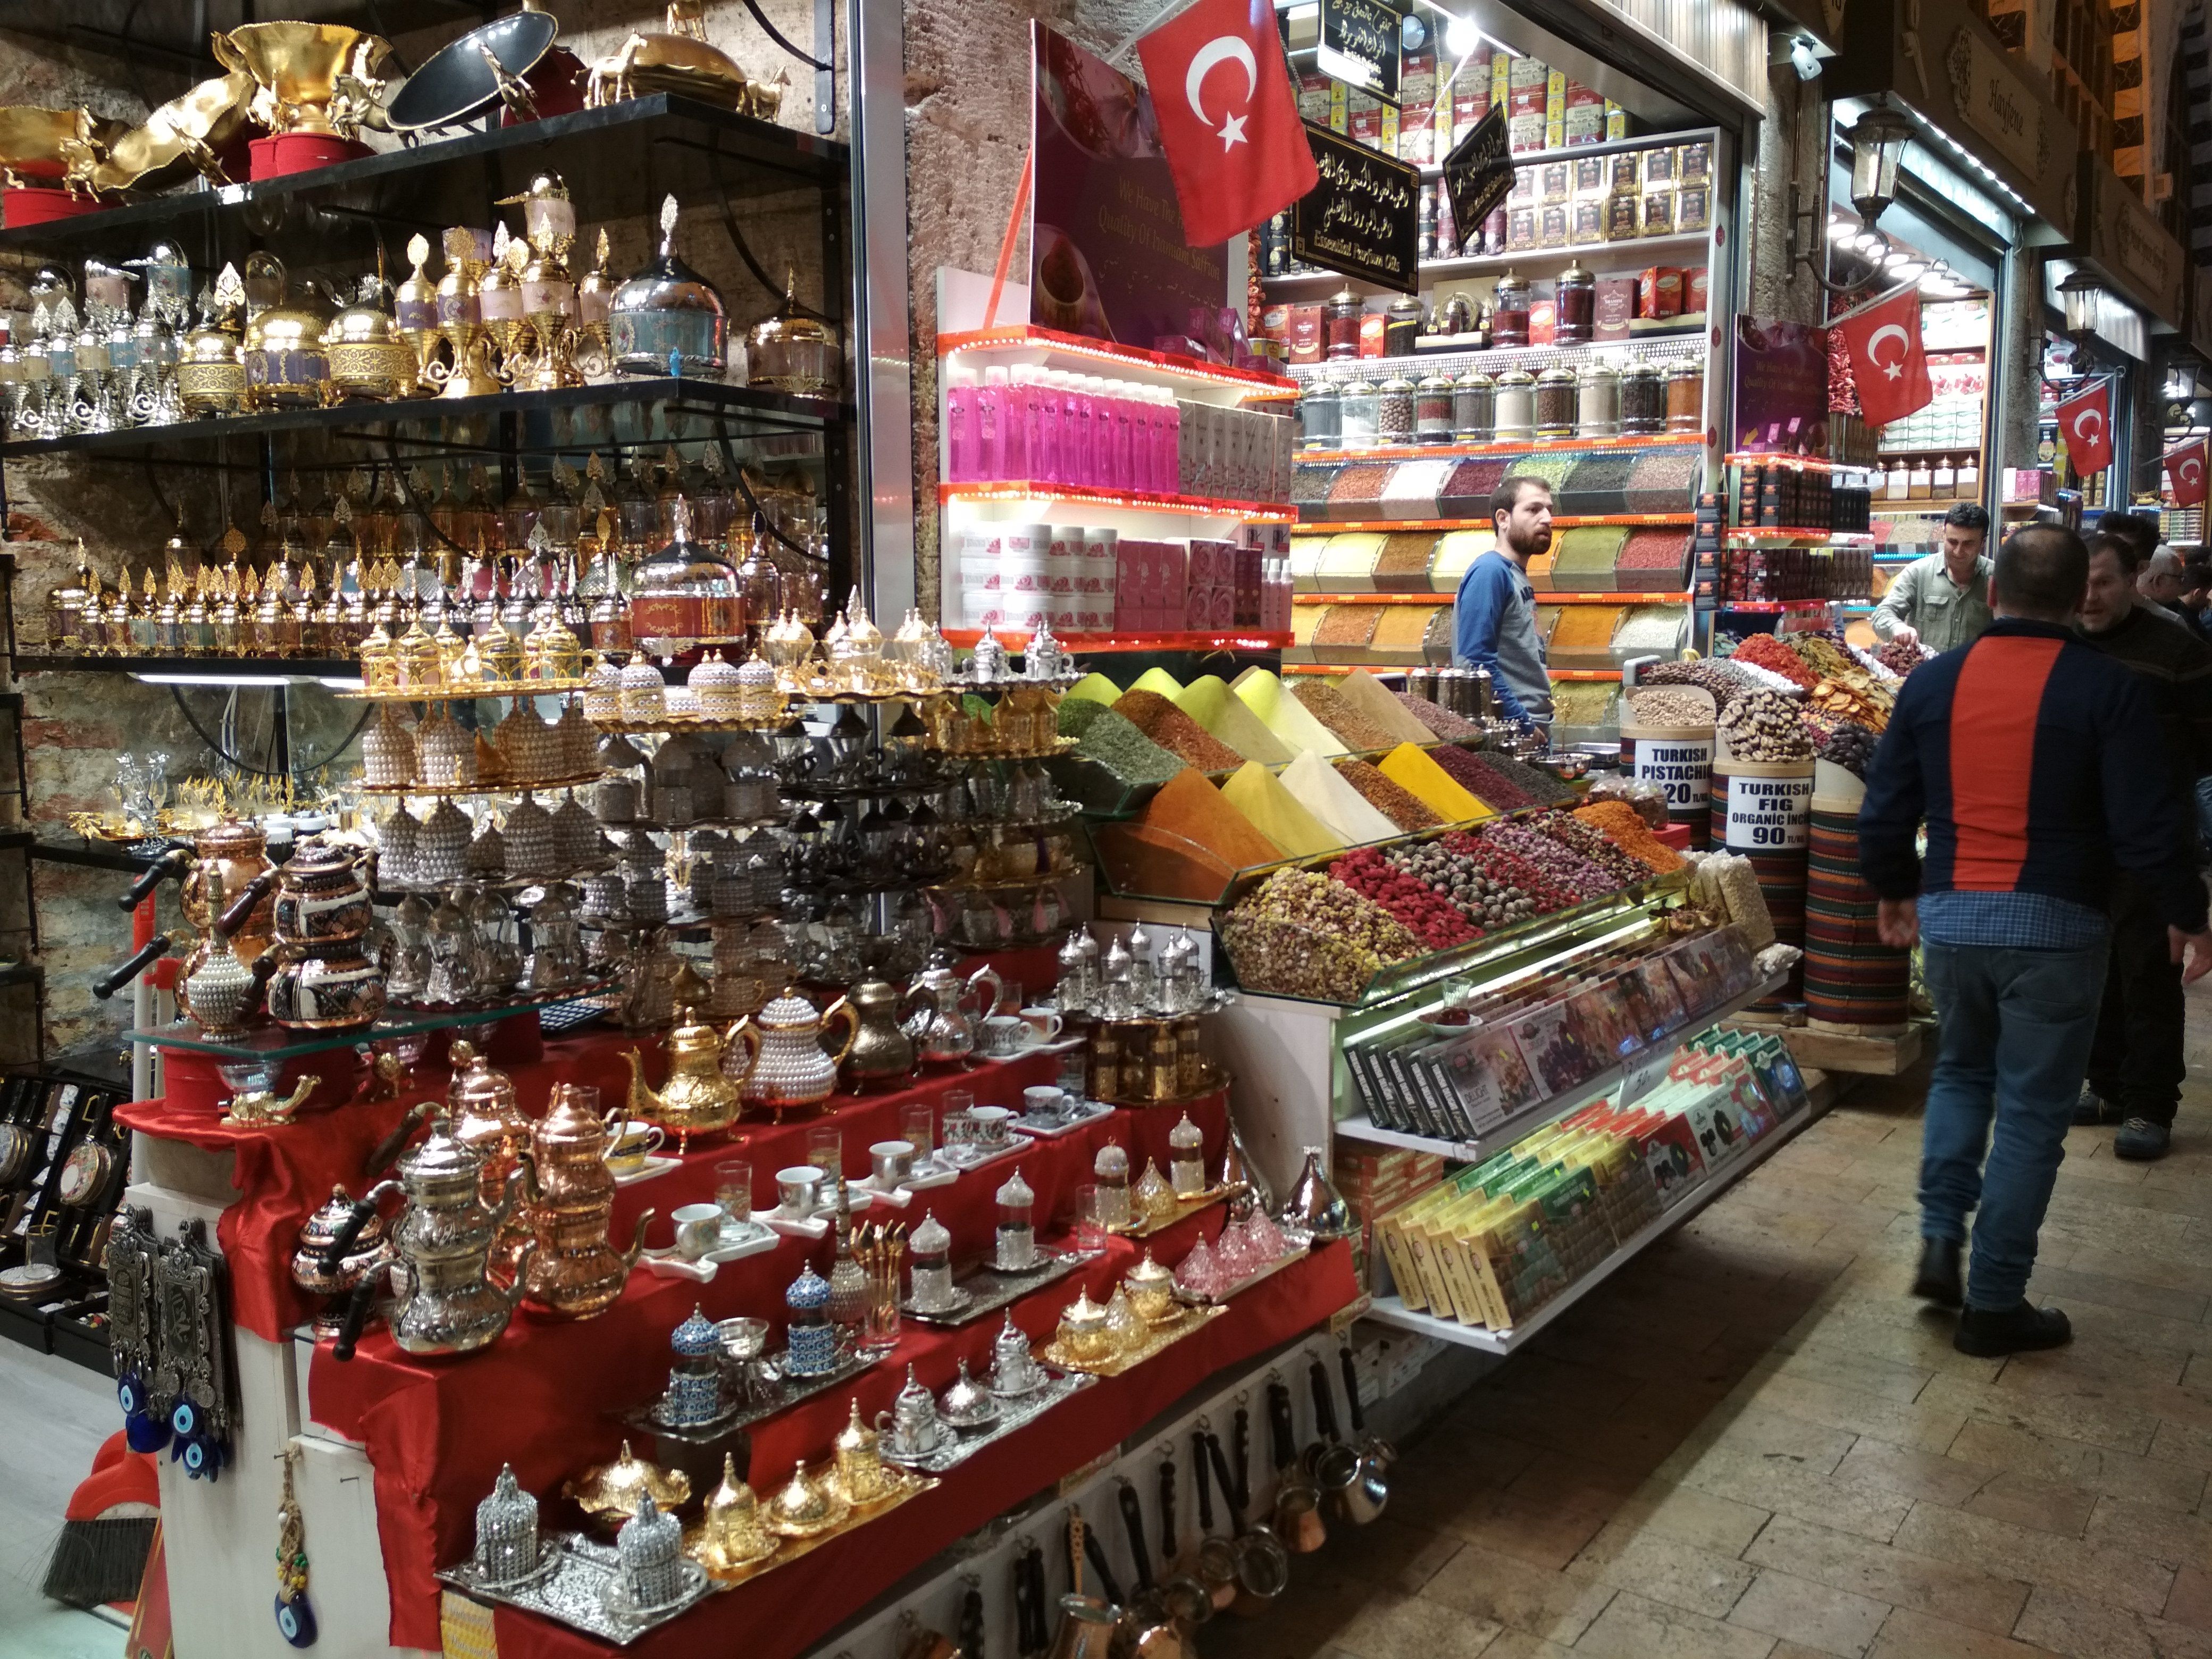 Caption: A photo of two shops inside the Egyptian bazaar in Istanbul, Turkey. The left shop has a variety of metal coffee pots and cups on display, while the shop on the right sells different spices in various colours. (Local Guide @DeniGu)